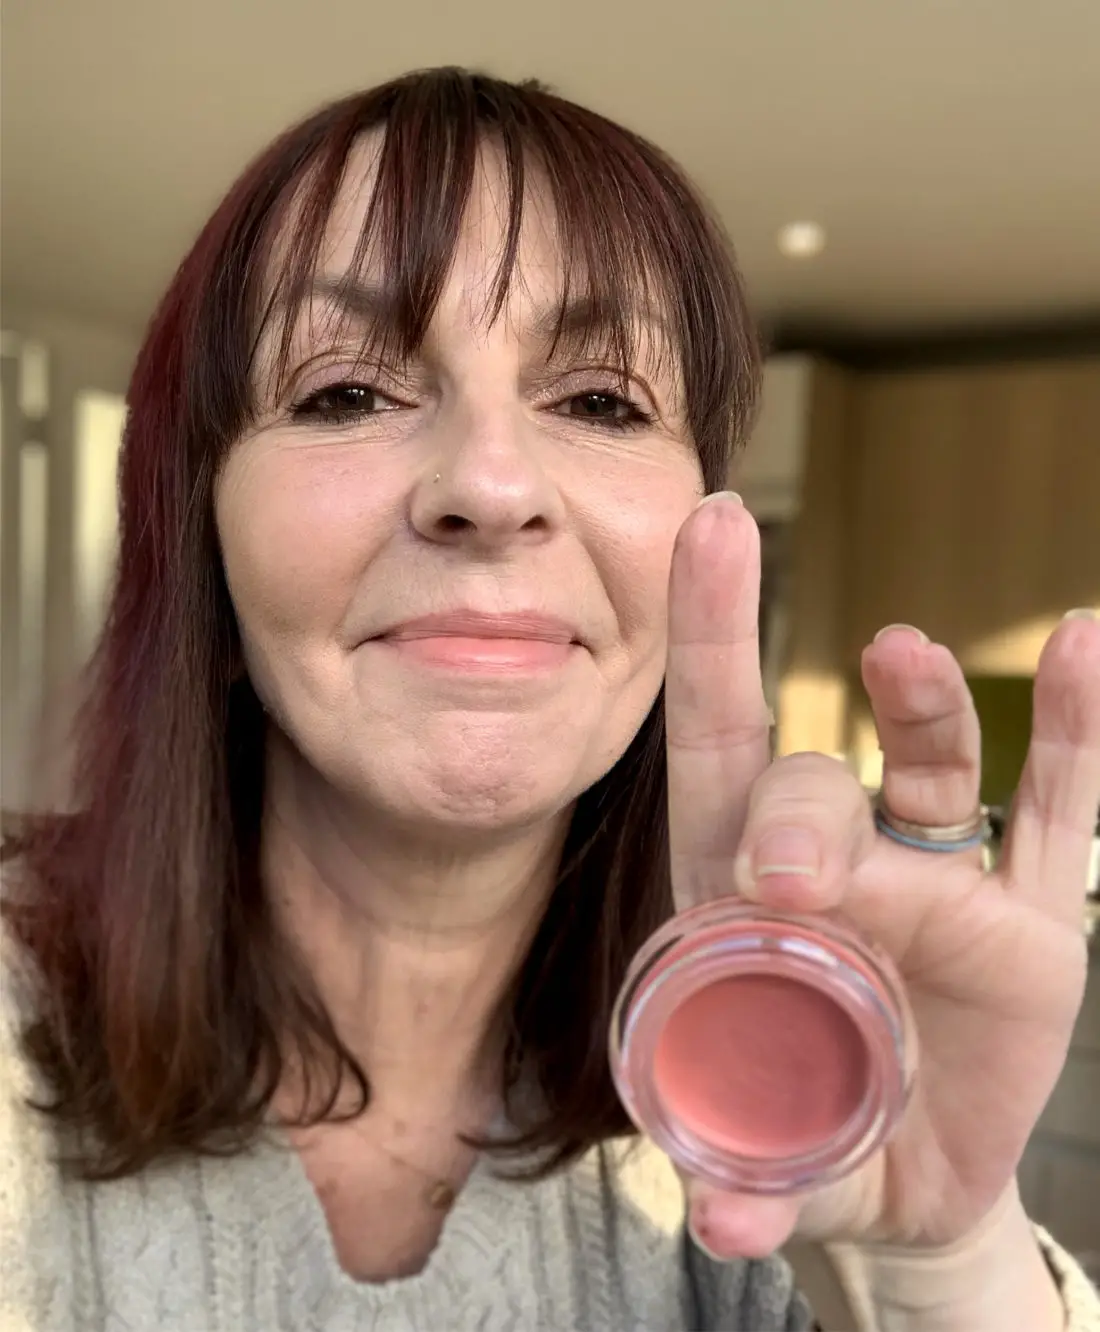 Review, Chanel N°1 DE CHANEL Red Camellia Revitalizing Lip and Cheek Balm